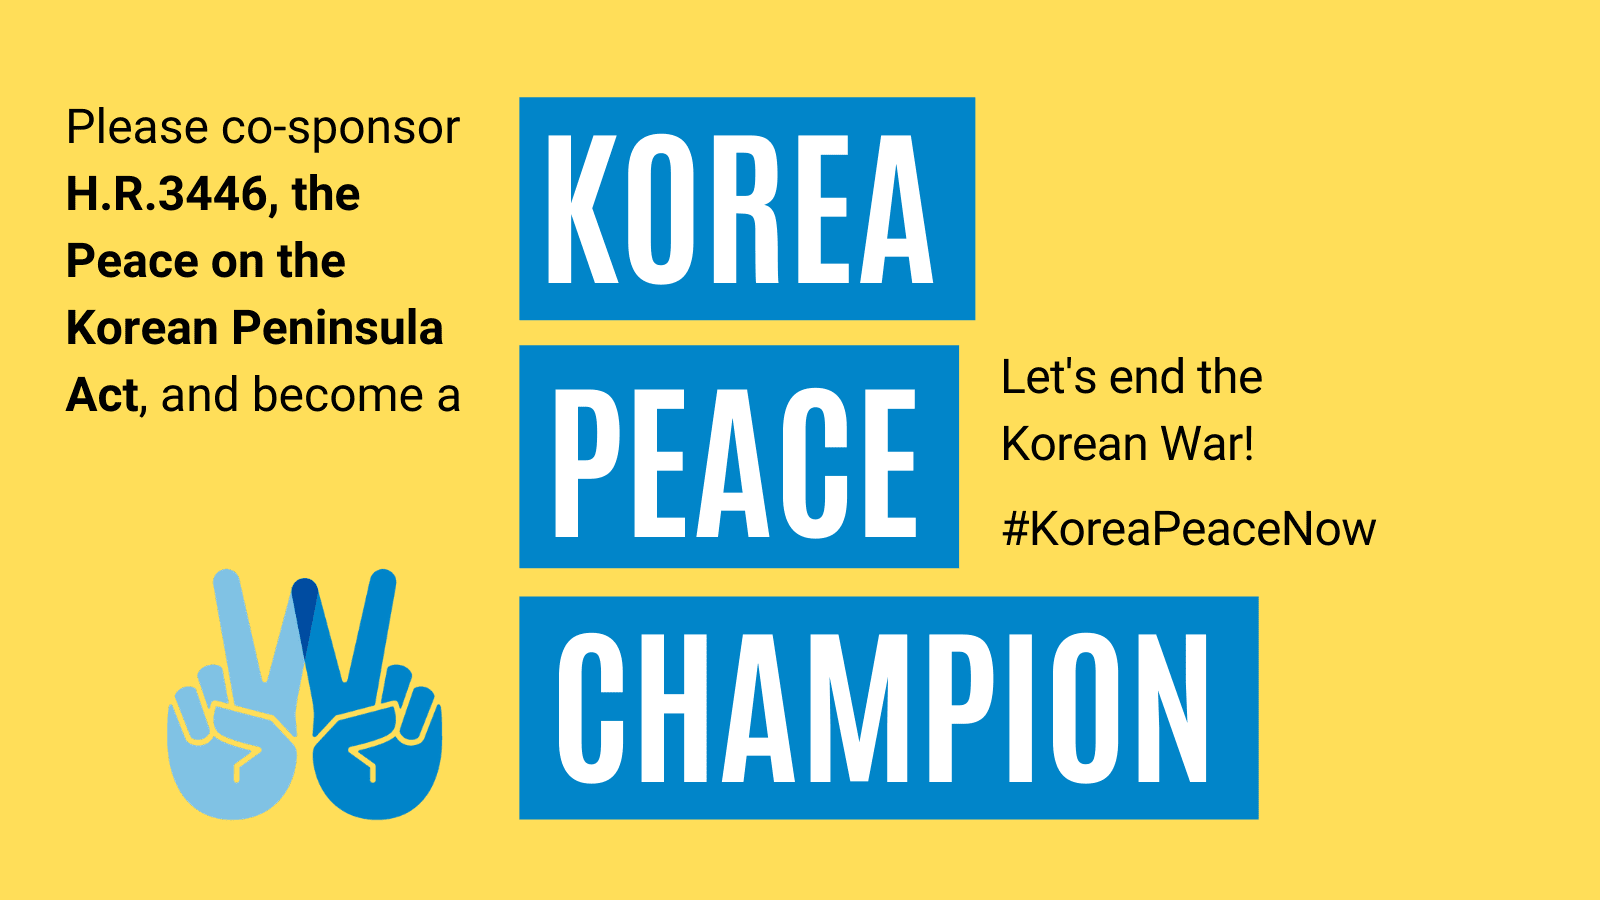 Please co-sponsor H.R.3446, the Peace on the Korean Peninsula Act, and become a Korea Peace Champion. Let's end the Korean War!